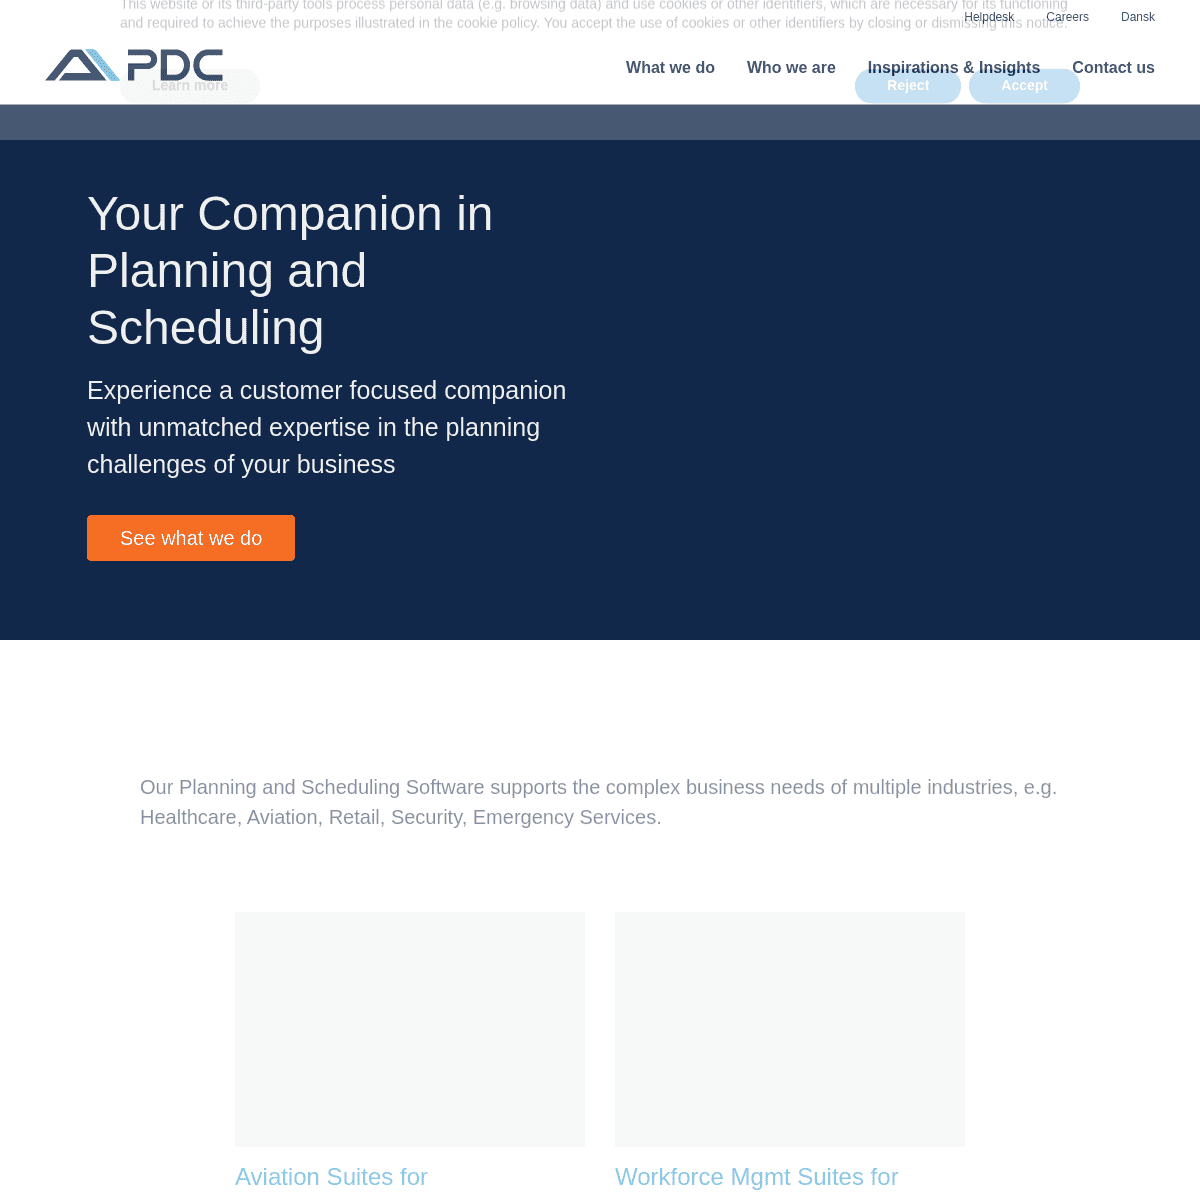 A complete backup of https://pdc.com